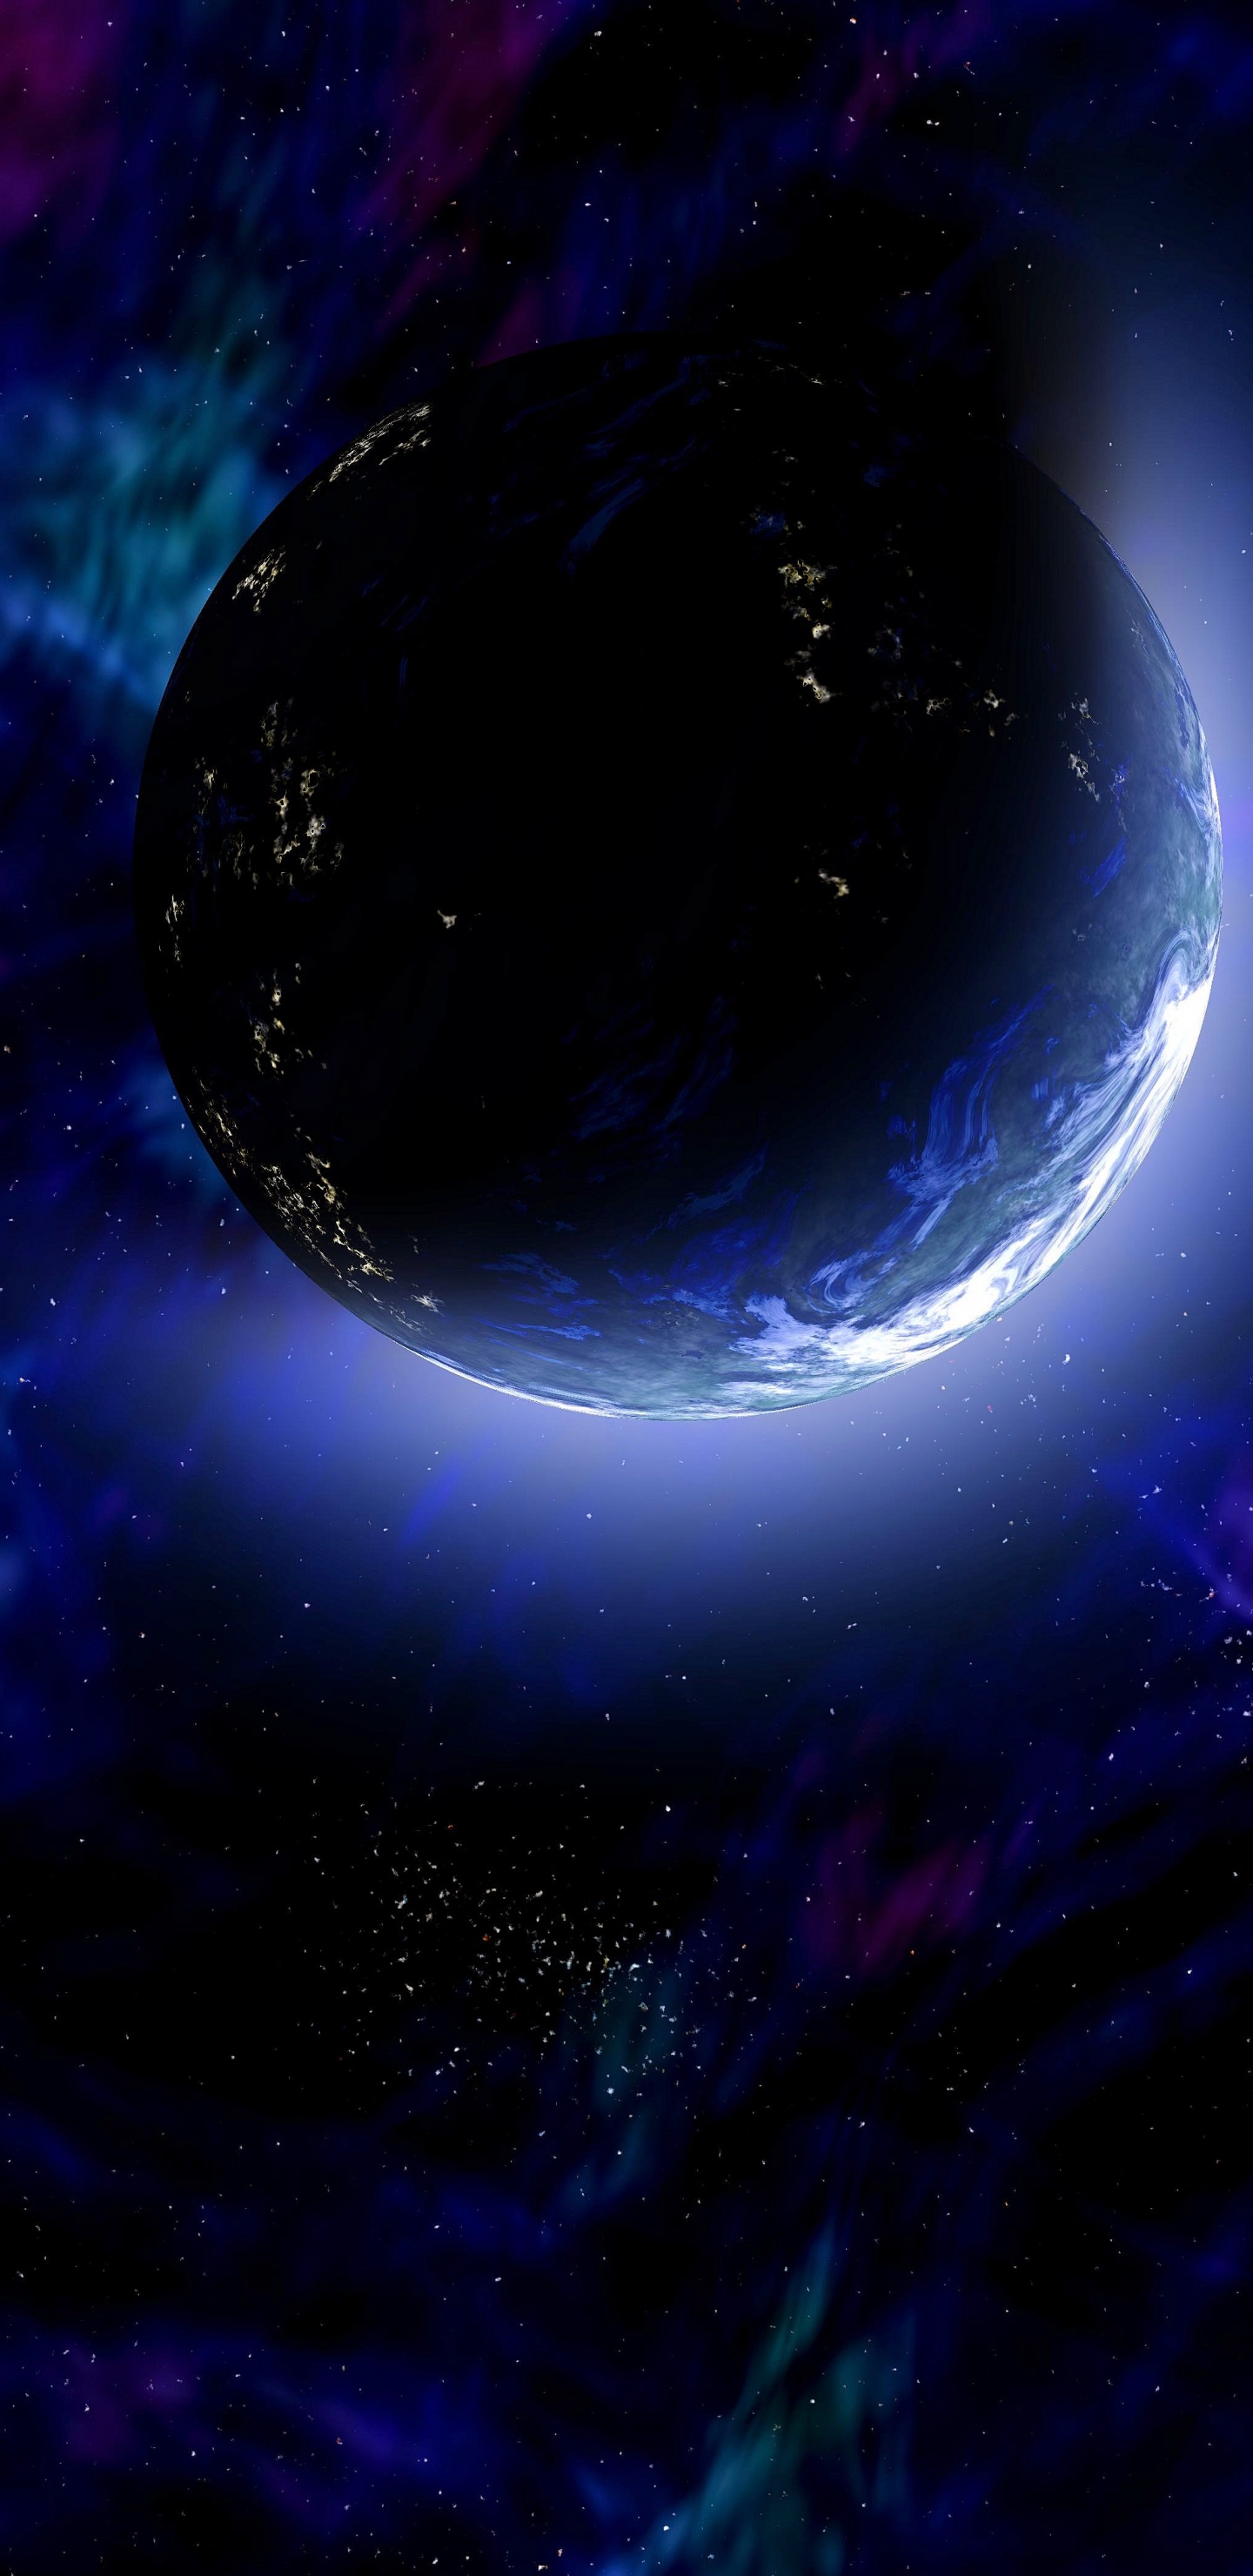 Blue and White Planet Painting. Wallpaper in 1440x2960 Resolution